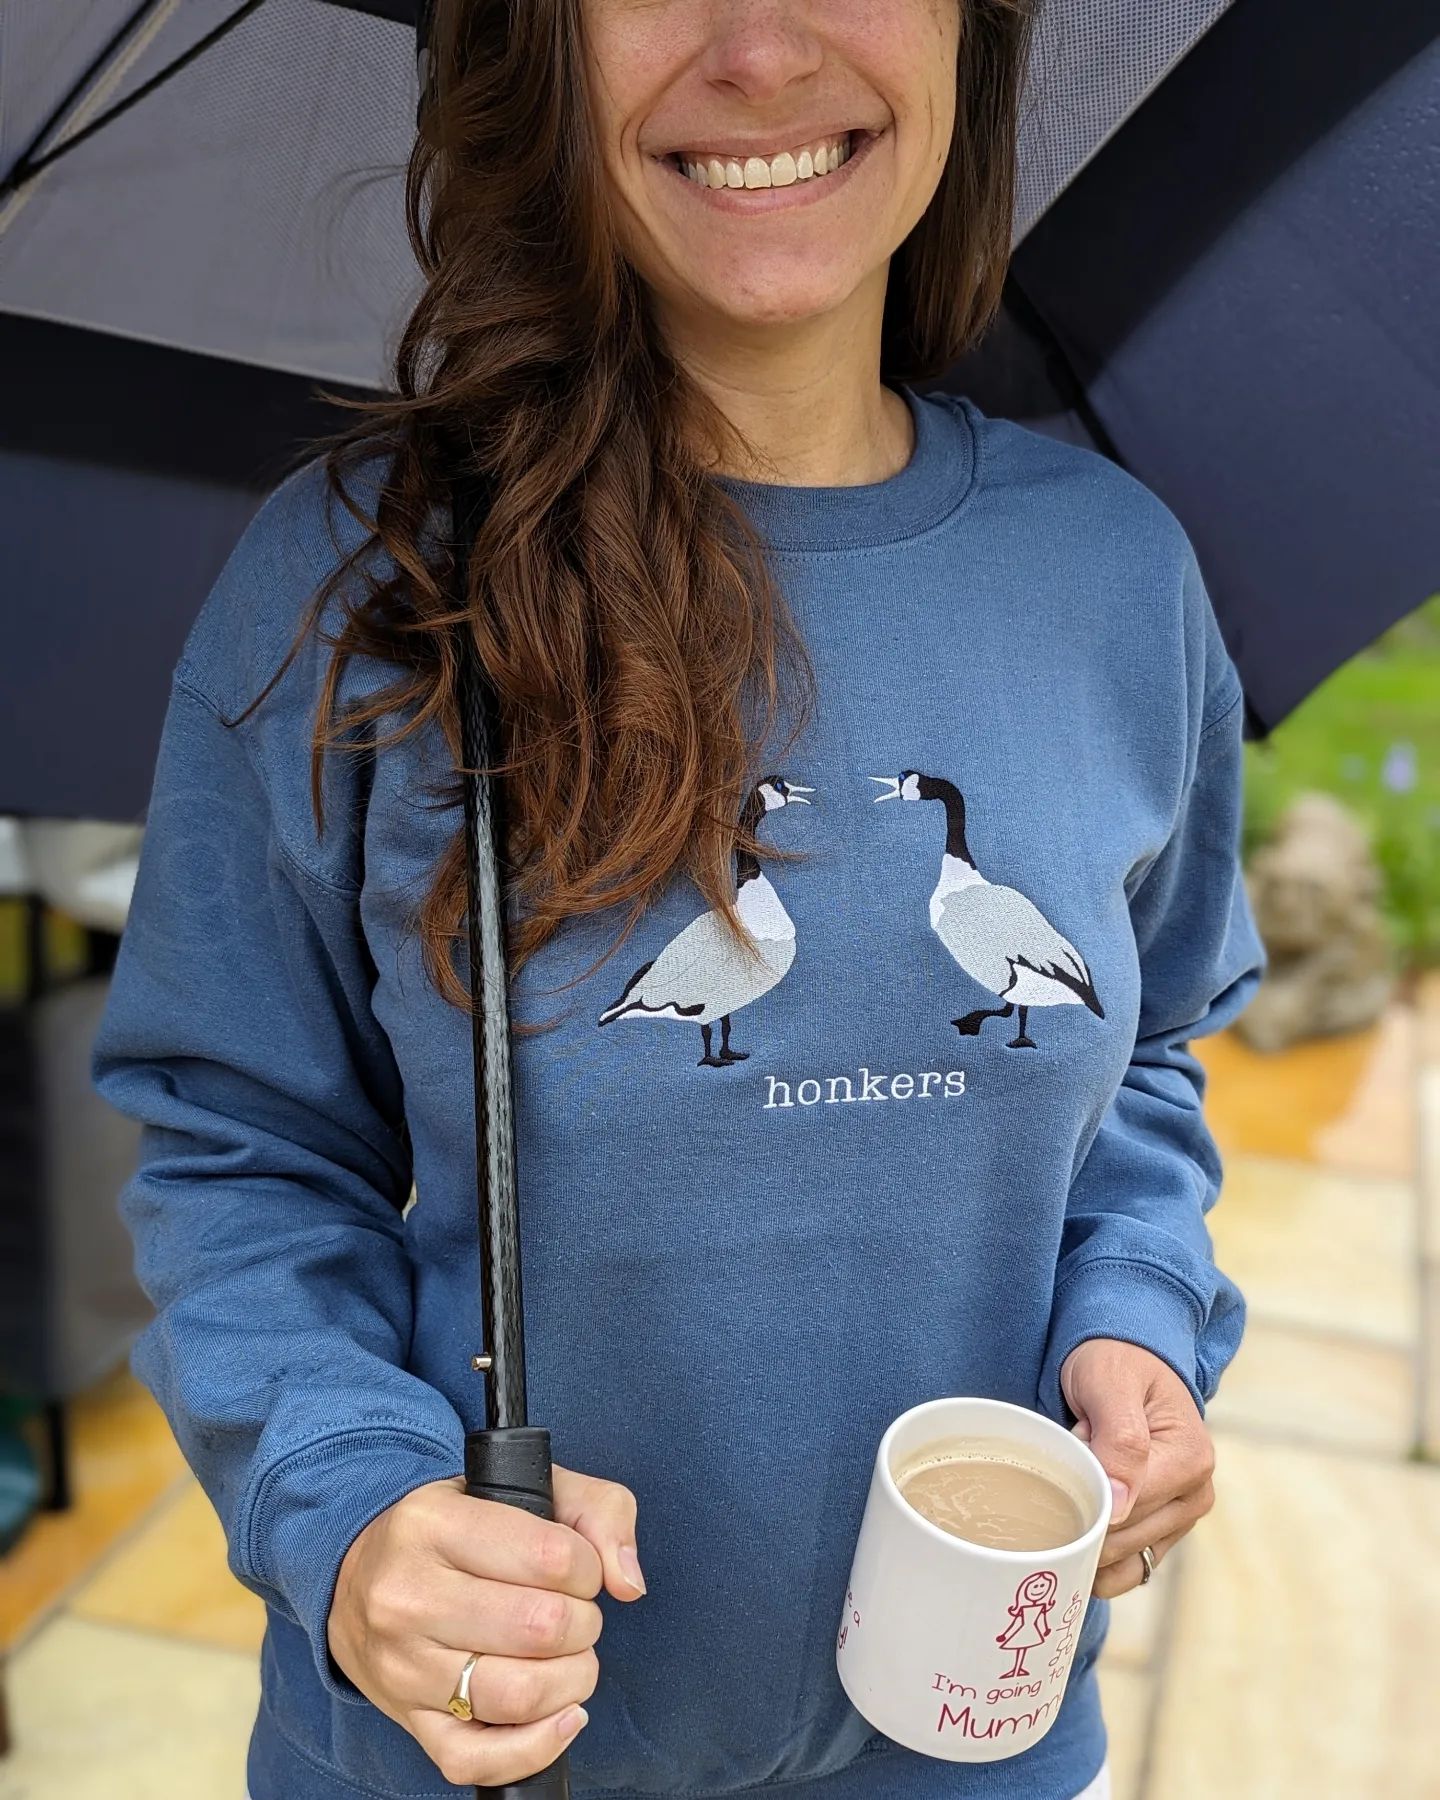 Good morning, lovelies ☕🌿🥰☔ Happy Friday!! 

After two beautifully sunny days, it's a very rainy one here today but we're due more sunshine over the weekend, so this is a welcome treat for our plants 🌧️☀️

In other news, hubby surprised me with this new sweater this morning 😂  It's snuggly, cute & witty! I love it 😄❤️

I hope you guys have an amazing day! 

Honk! 🪿😂

(The sweater is from @moesews_shop ❤️ She has lots of awesome designs!) 

#rainyday #newsweater #honkers